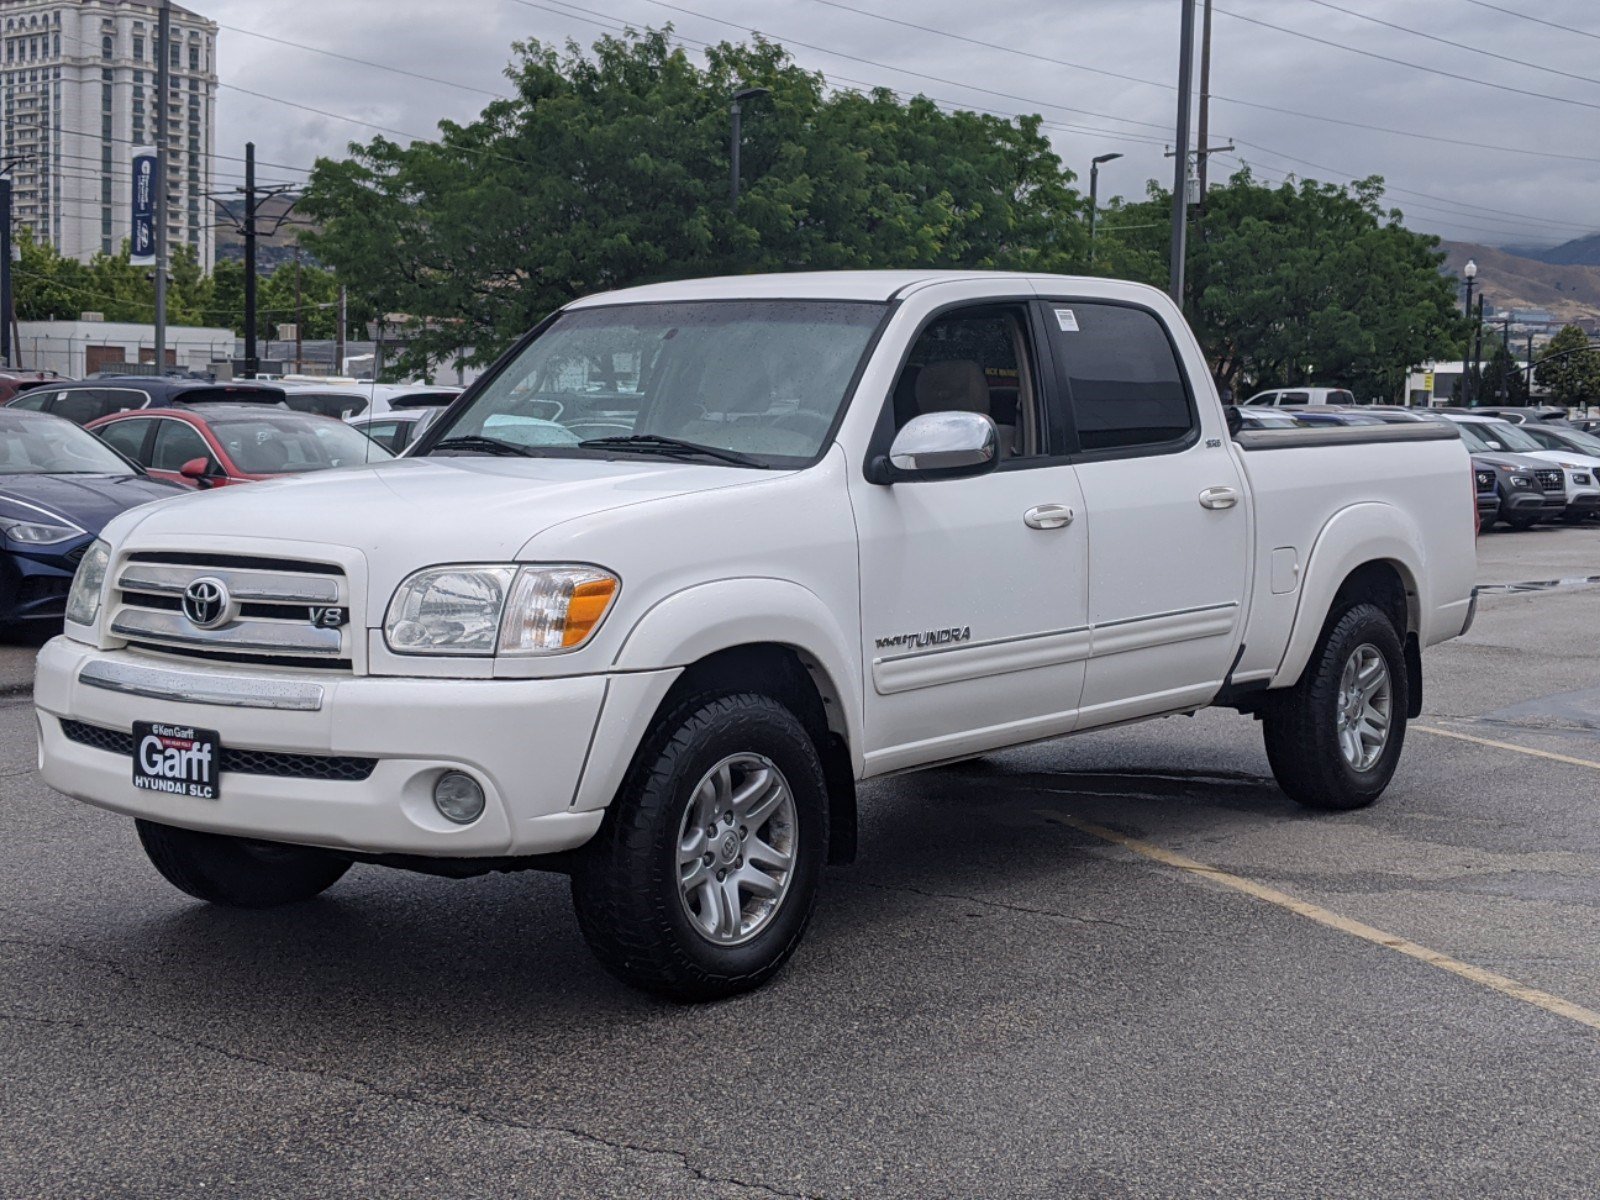 Pre-Owned 2006 Toyota Tundra SR5 Crew Cab Pickup in Salt Lake City